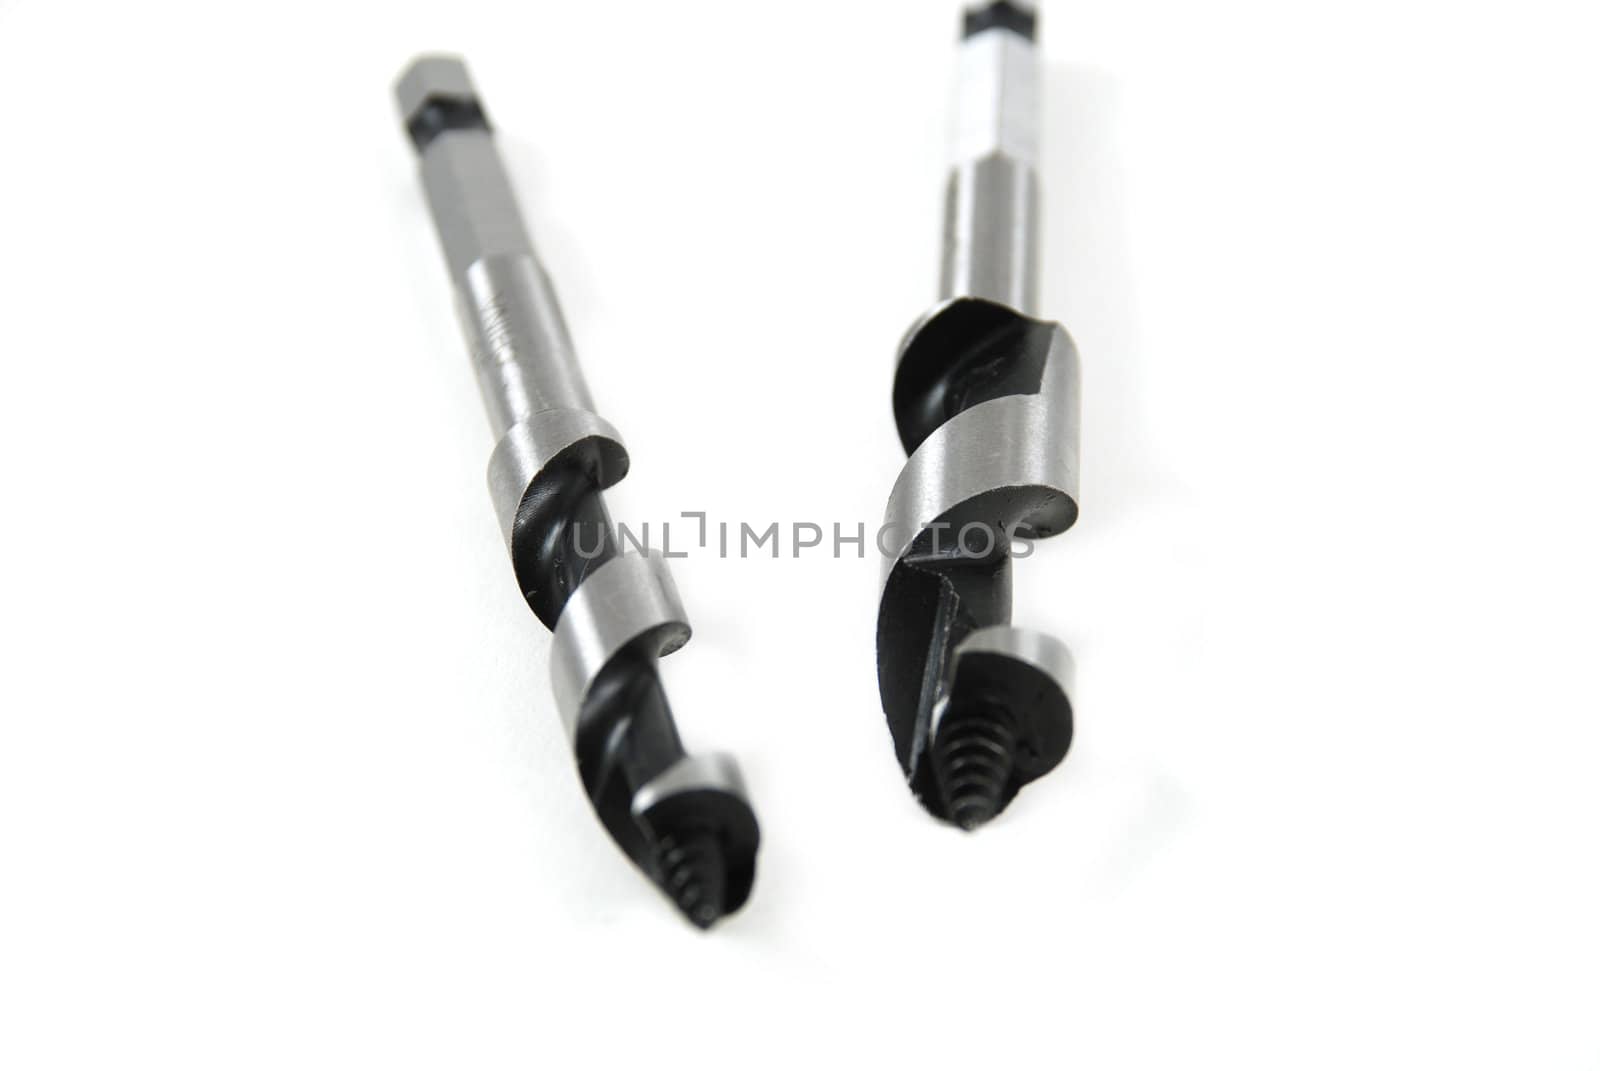 stock pictures of drill bits with augers